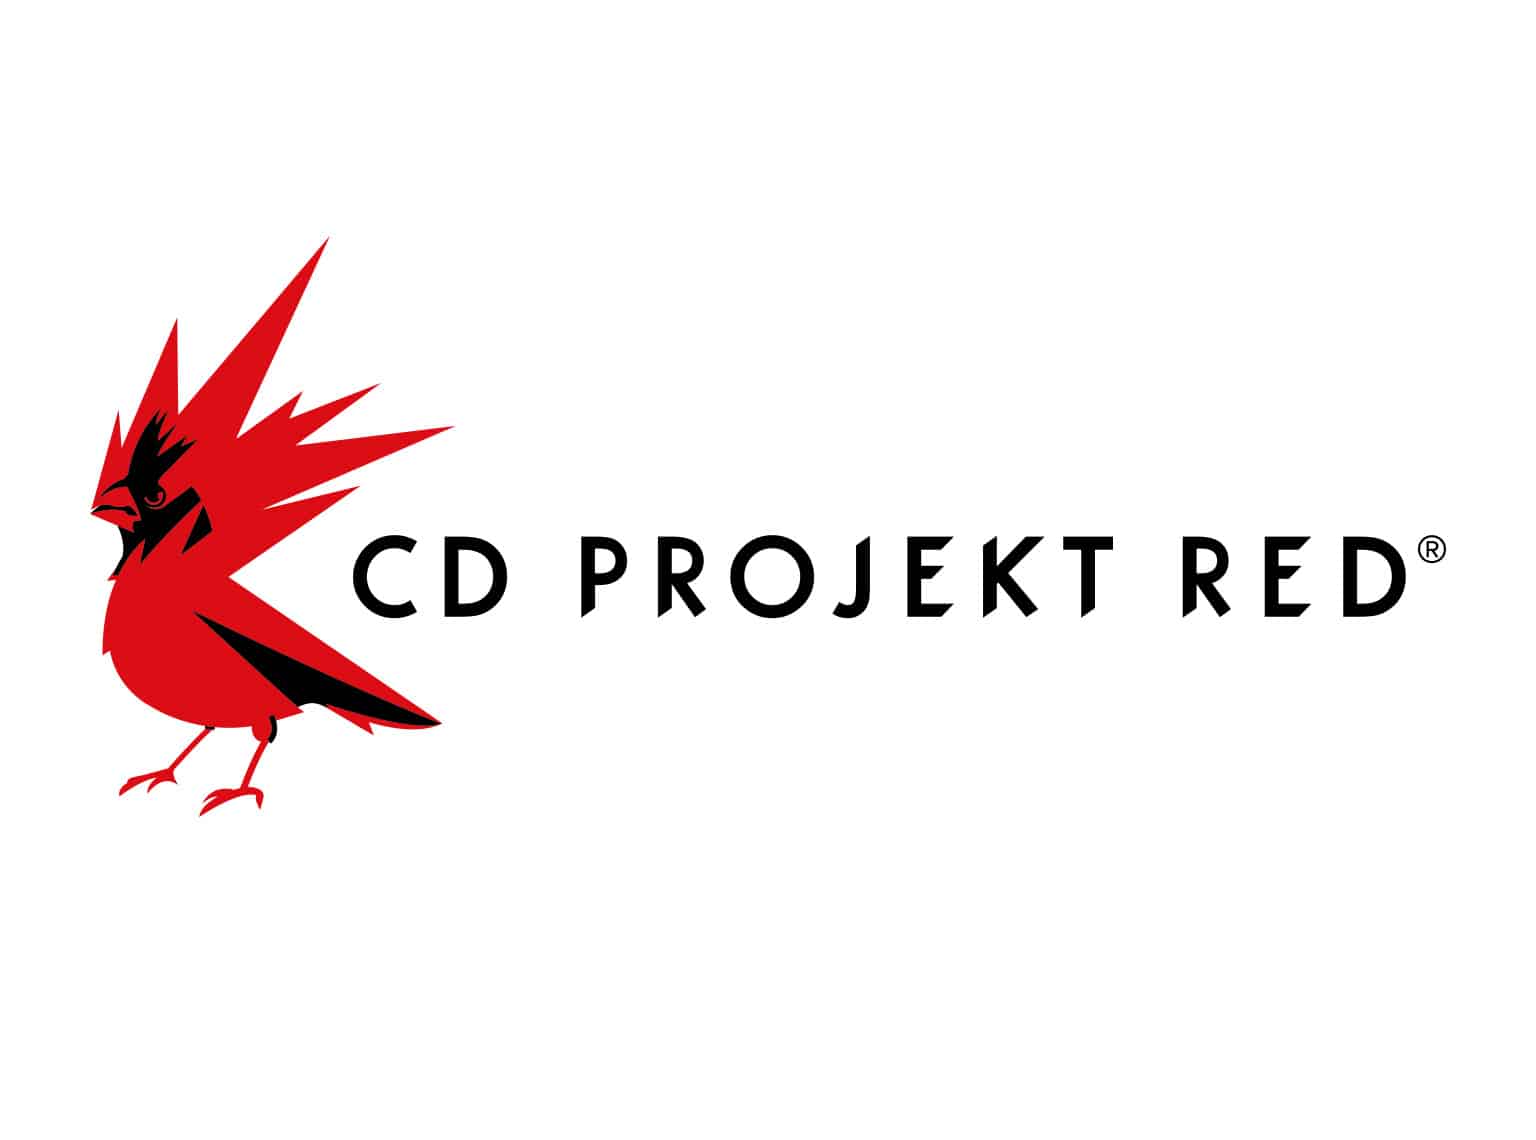 After Cyberpunk: CD Projekt share price falls by more than 75%